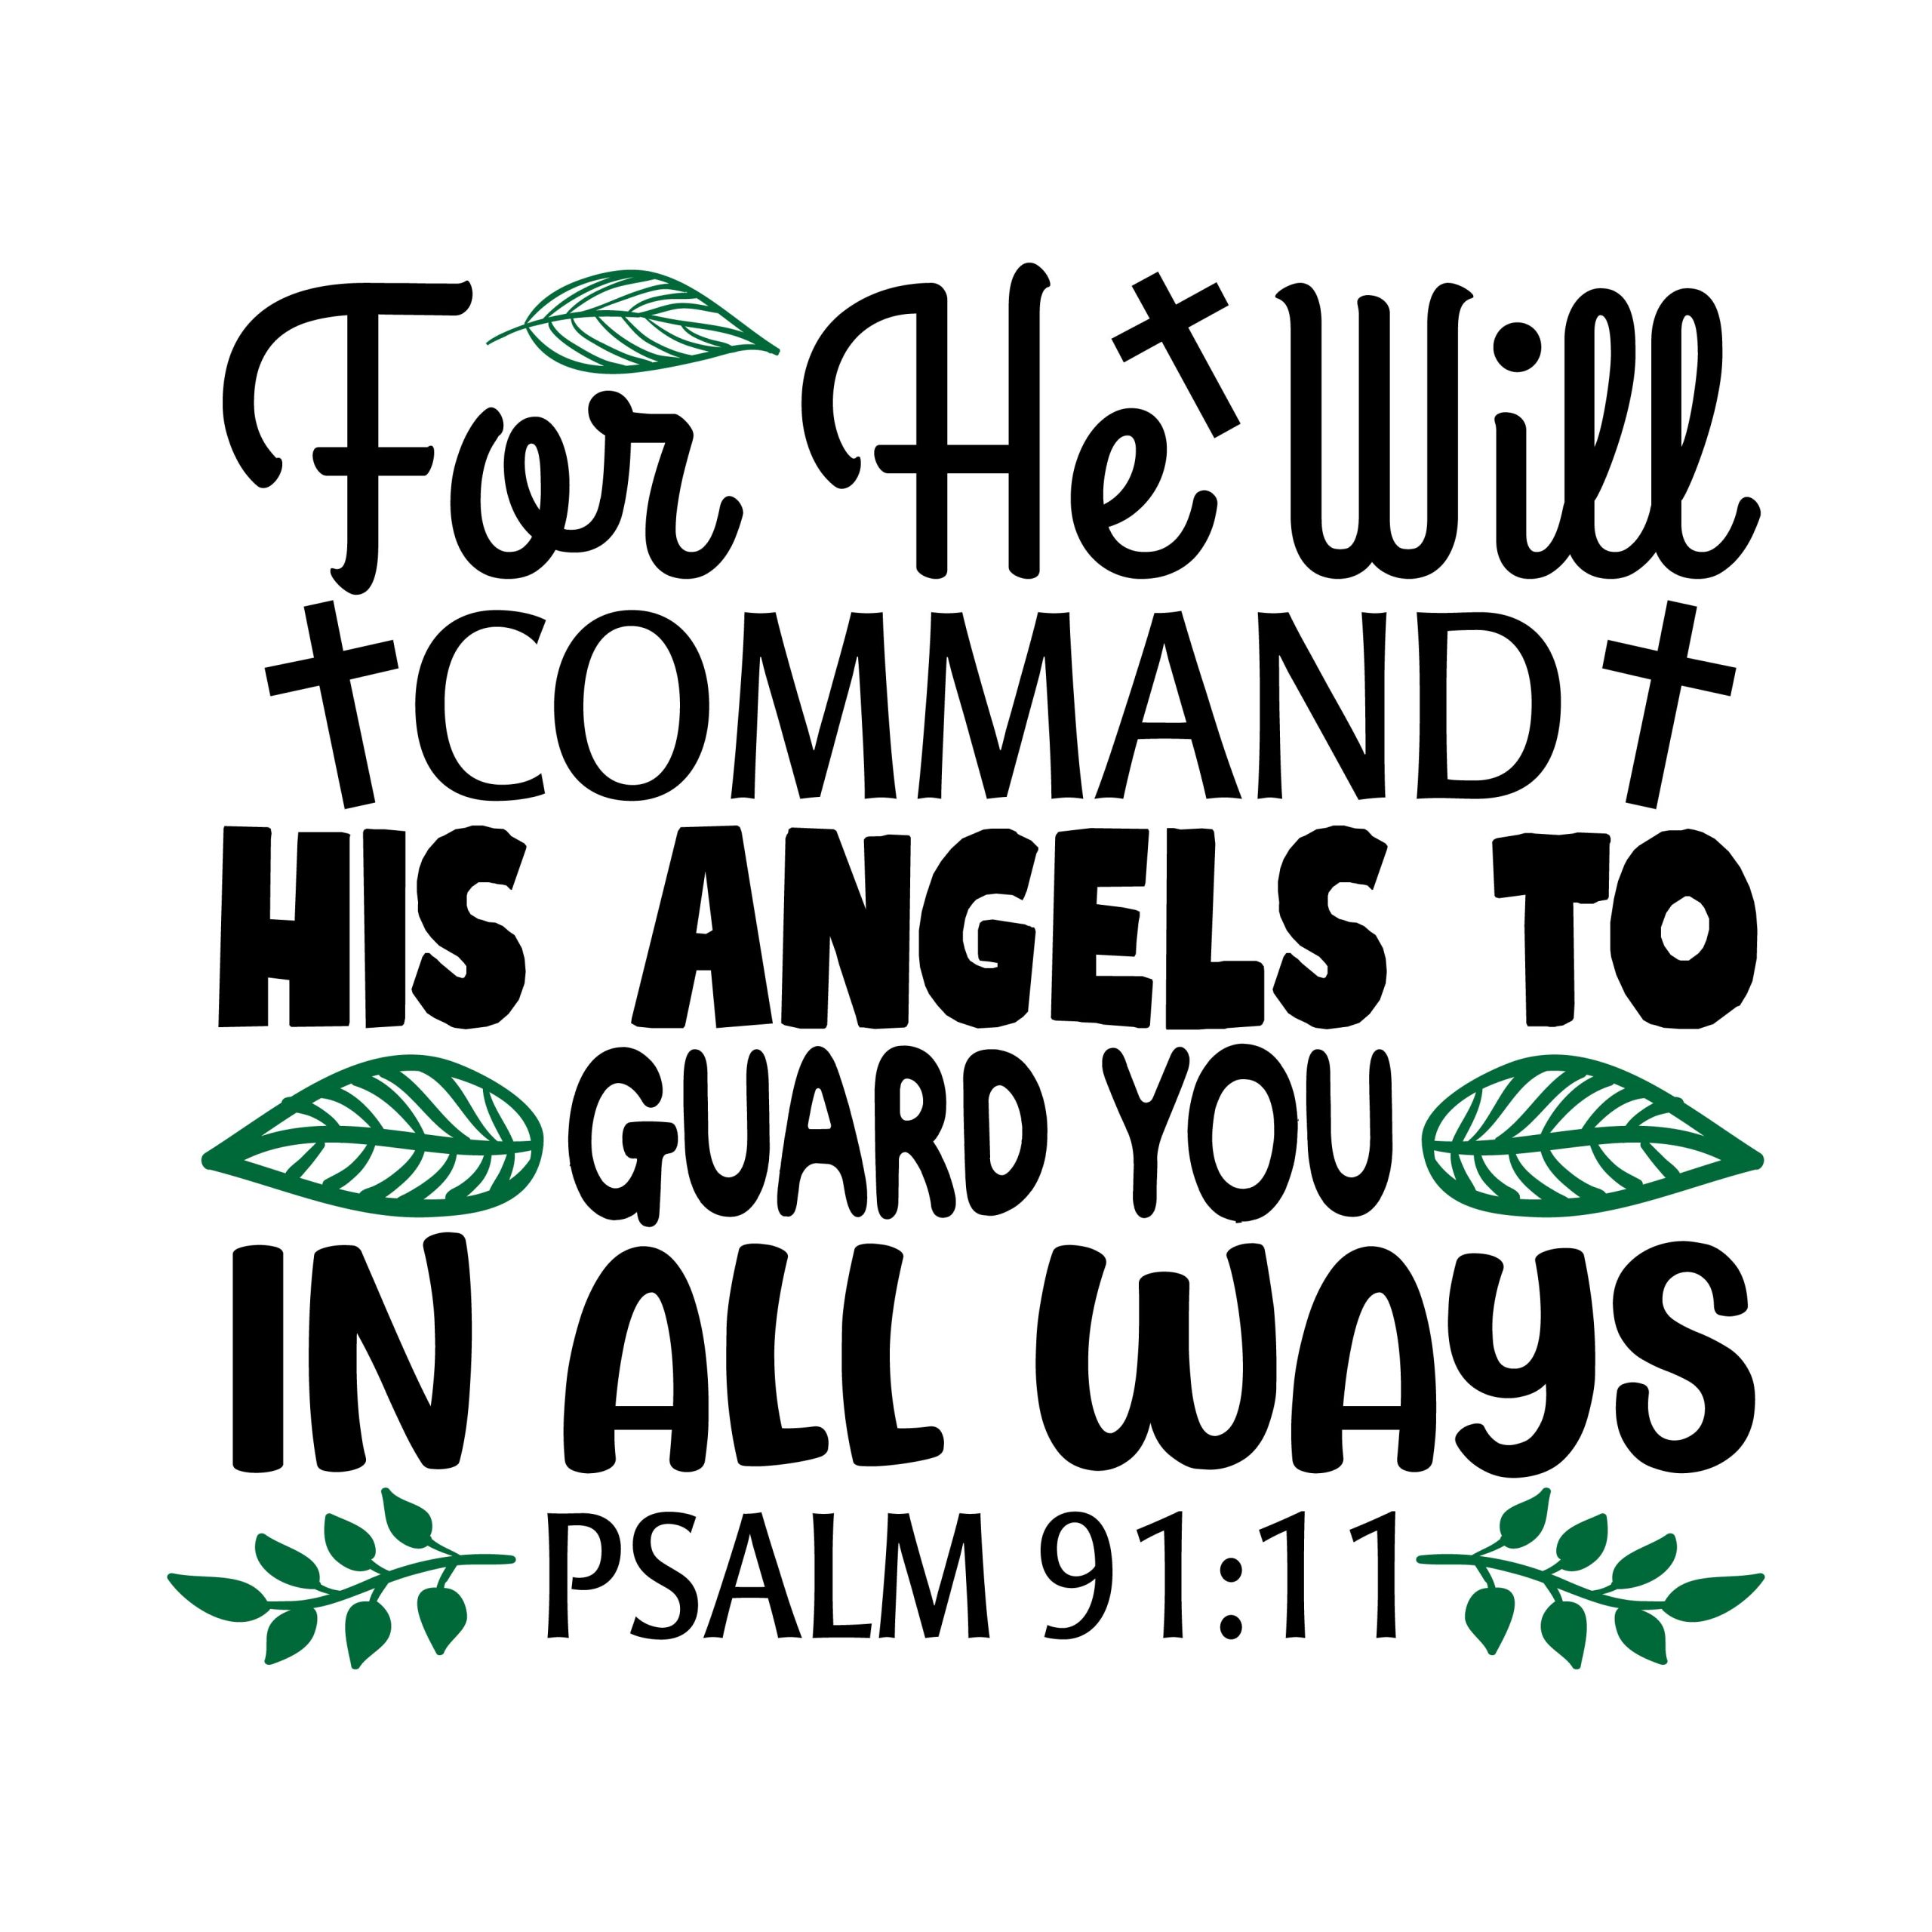 For he will command his angels to guard you in all ways Psalm 91:11, bible verses, scripture verses, svg files, passages, sayings, cricut designs, silhouette, embroidery, bundle, free cut files, design space, vector